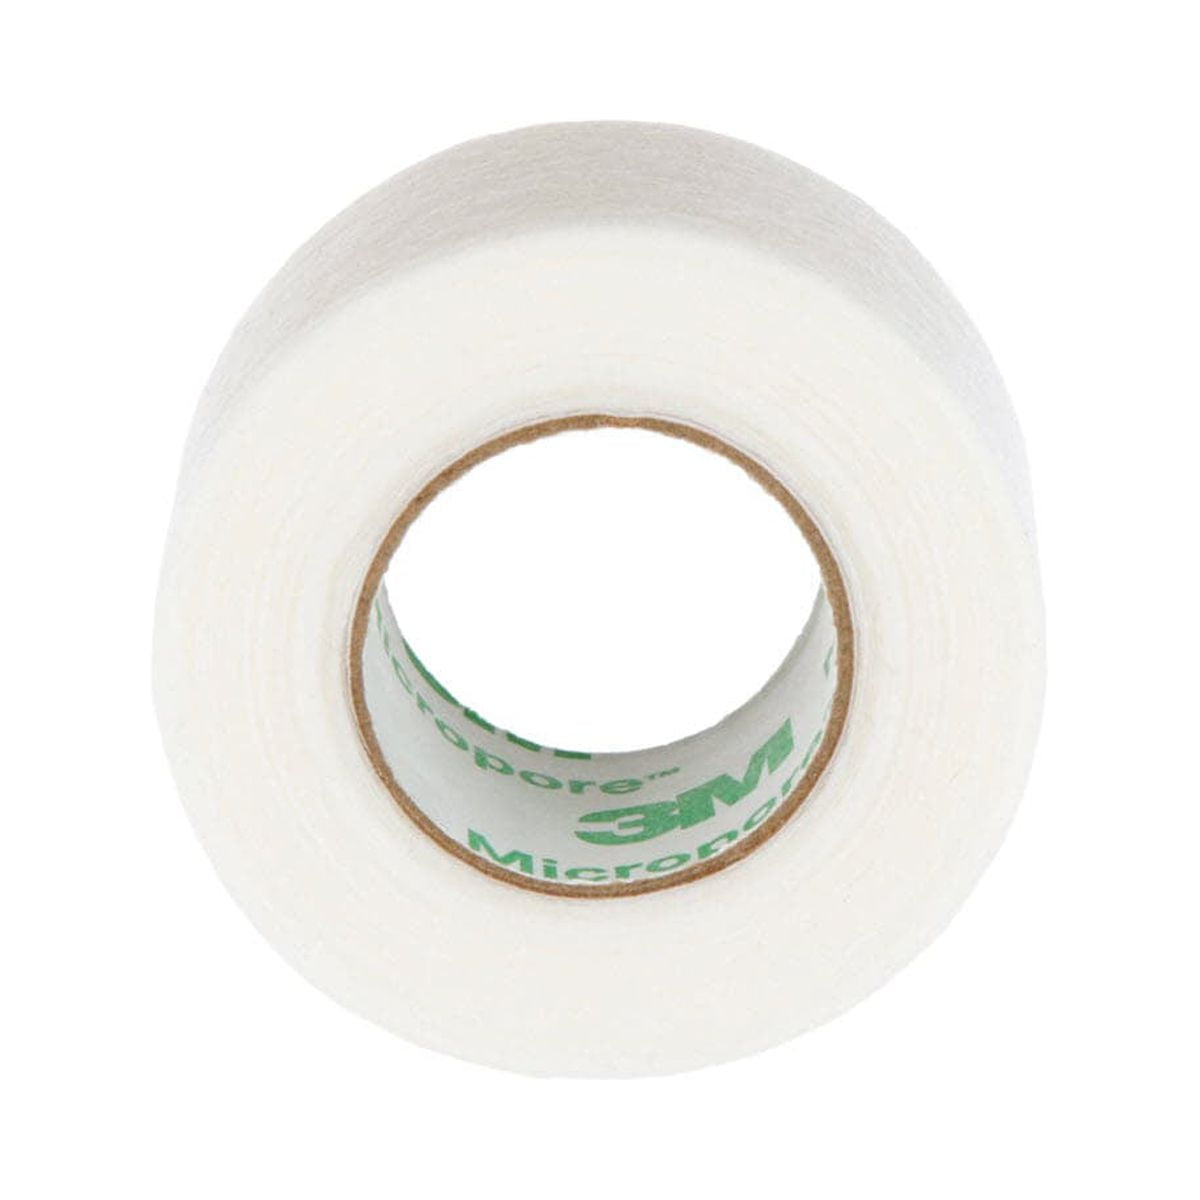 Microporous Tape / Paper Surgical Adhesive Bandage » GHC USA